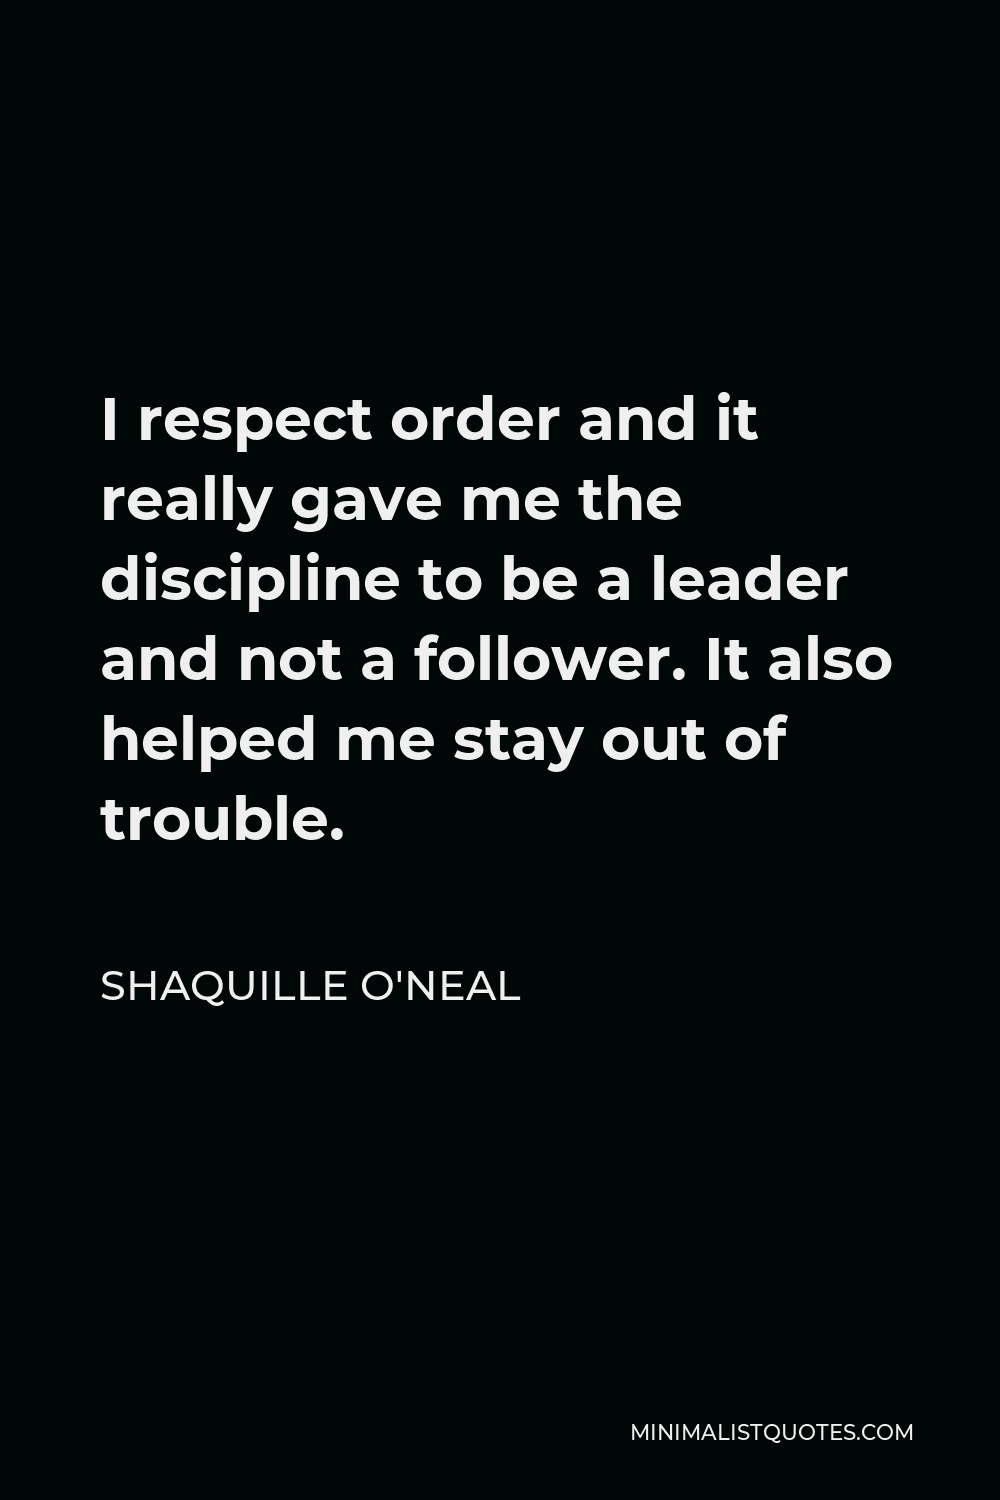 Shaquille O'Neal Quote - I respect order and it really gave me the discipline to be a leader and not a follower. It also helped me stay out of trouble.